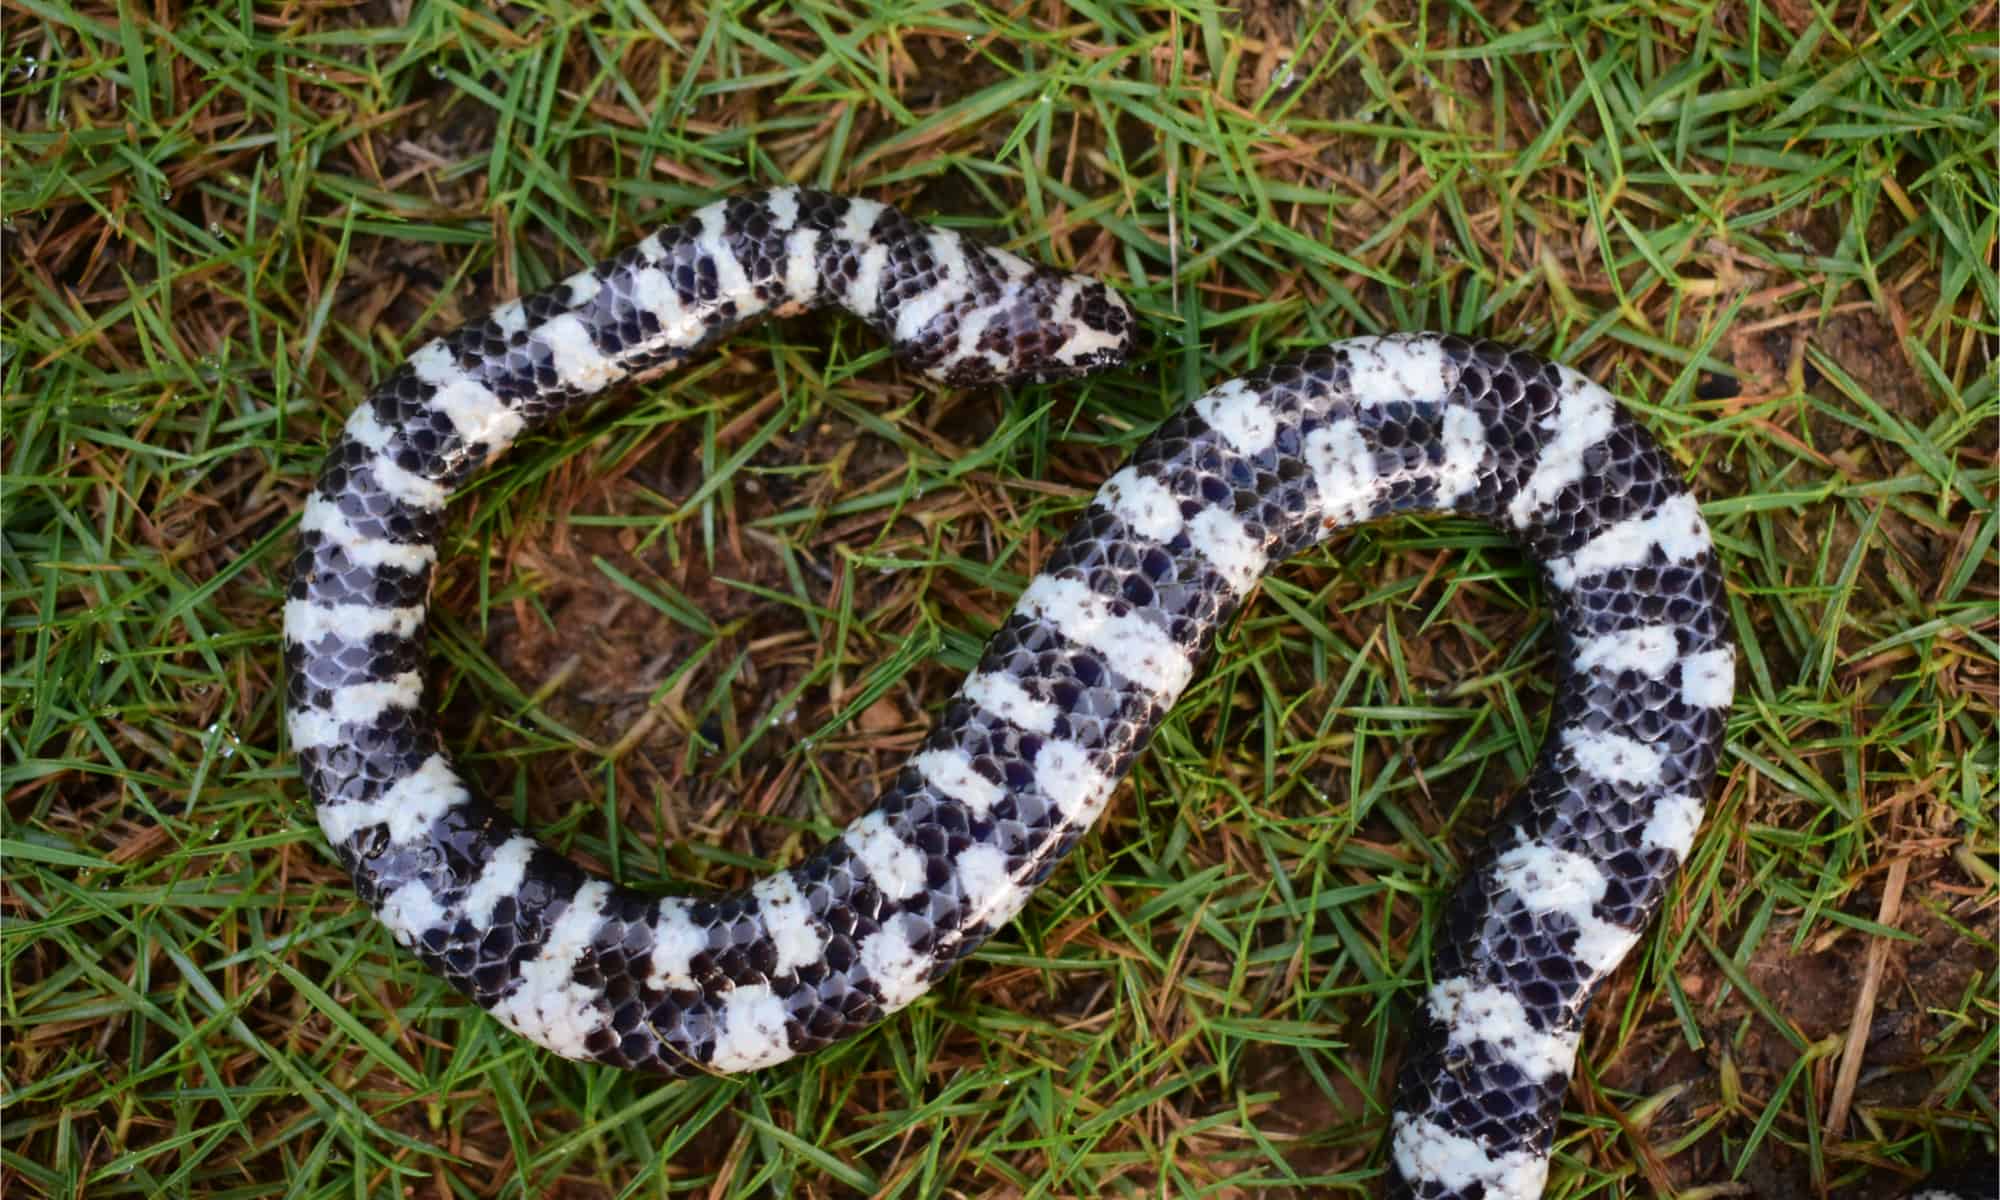 The white and black chekered pattern of a red-tailed pipe snake